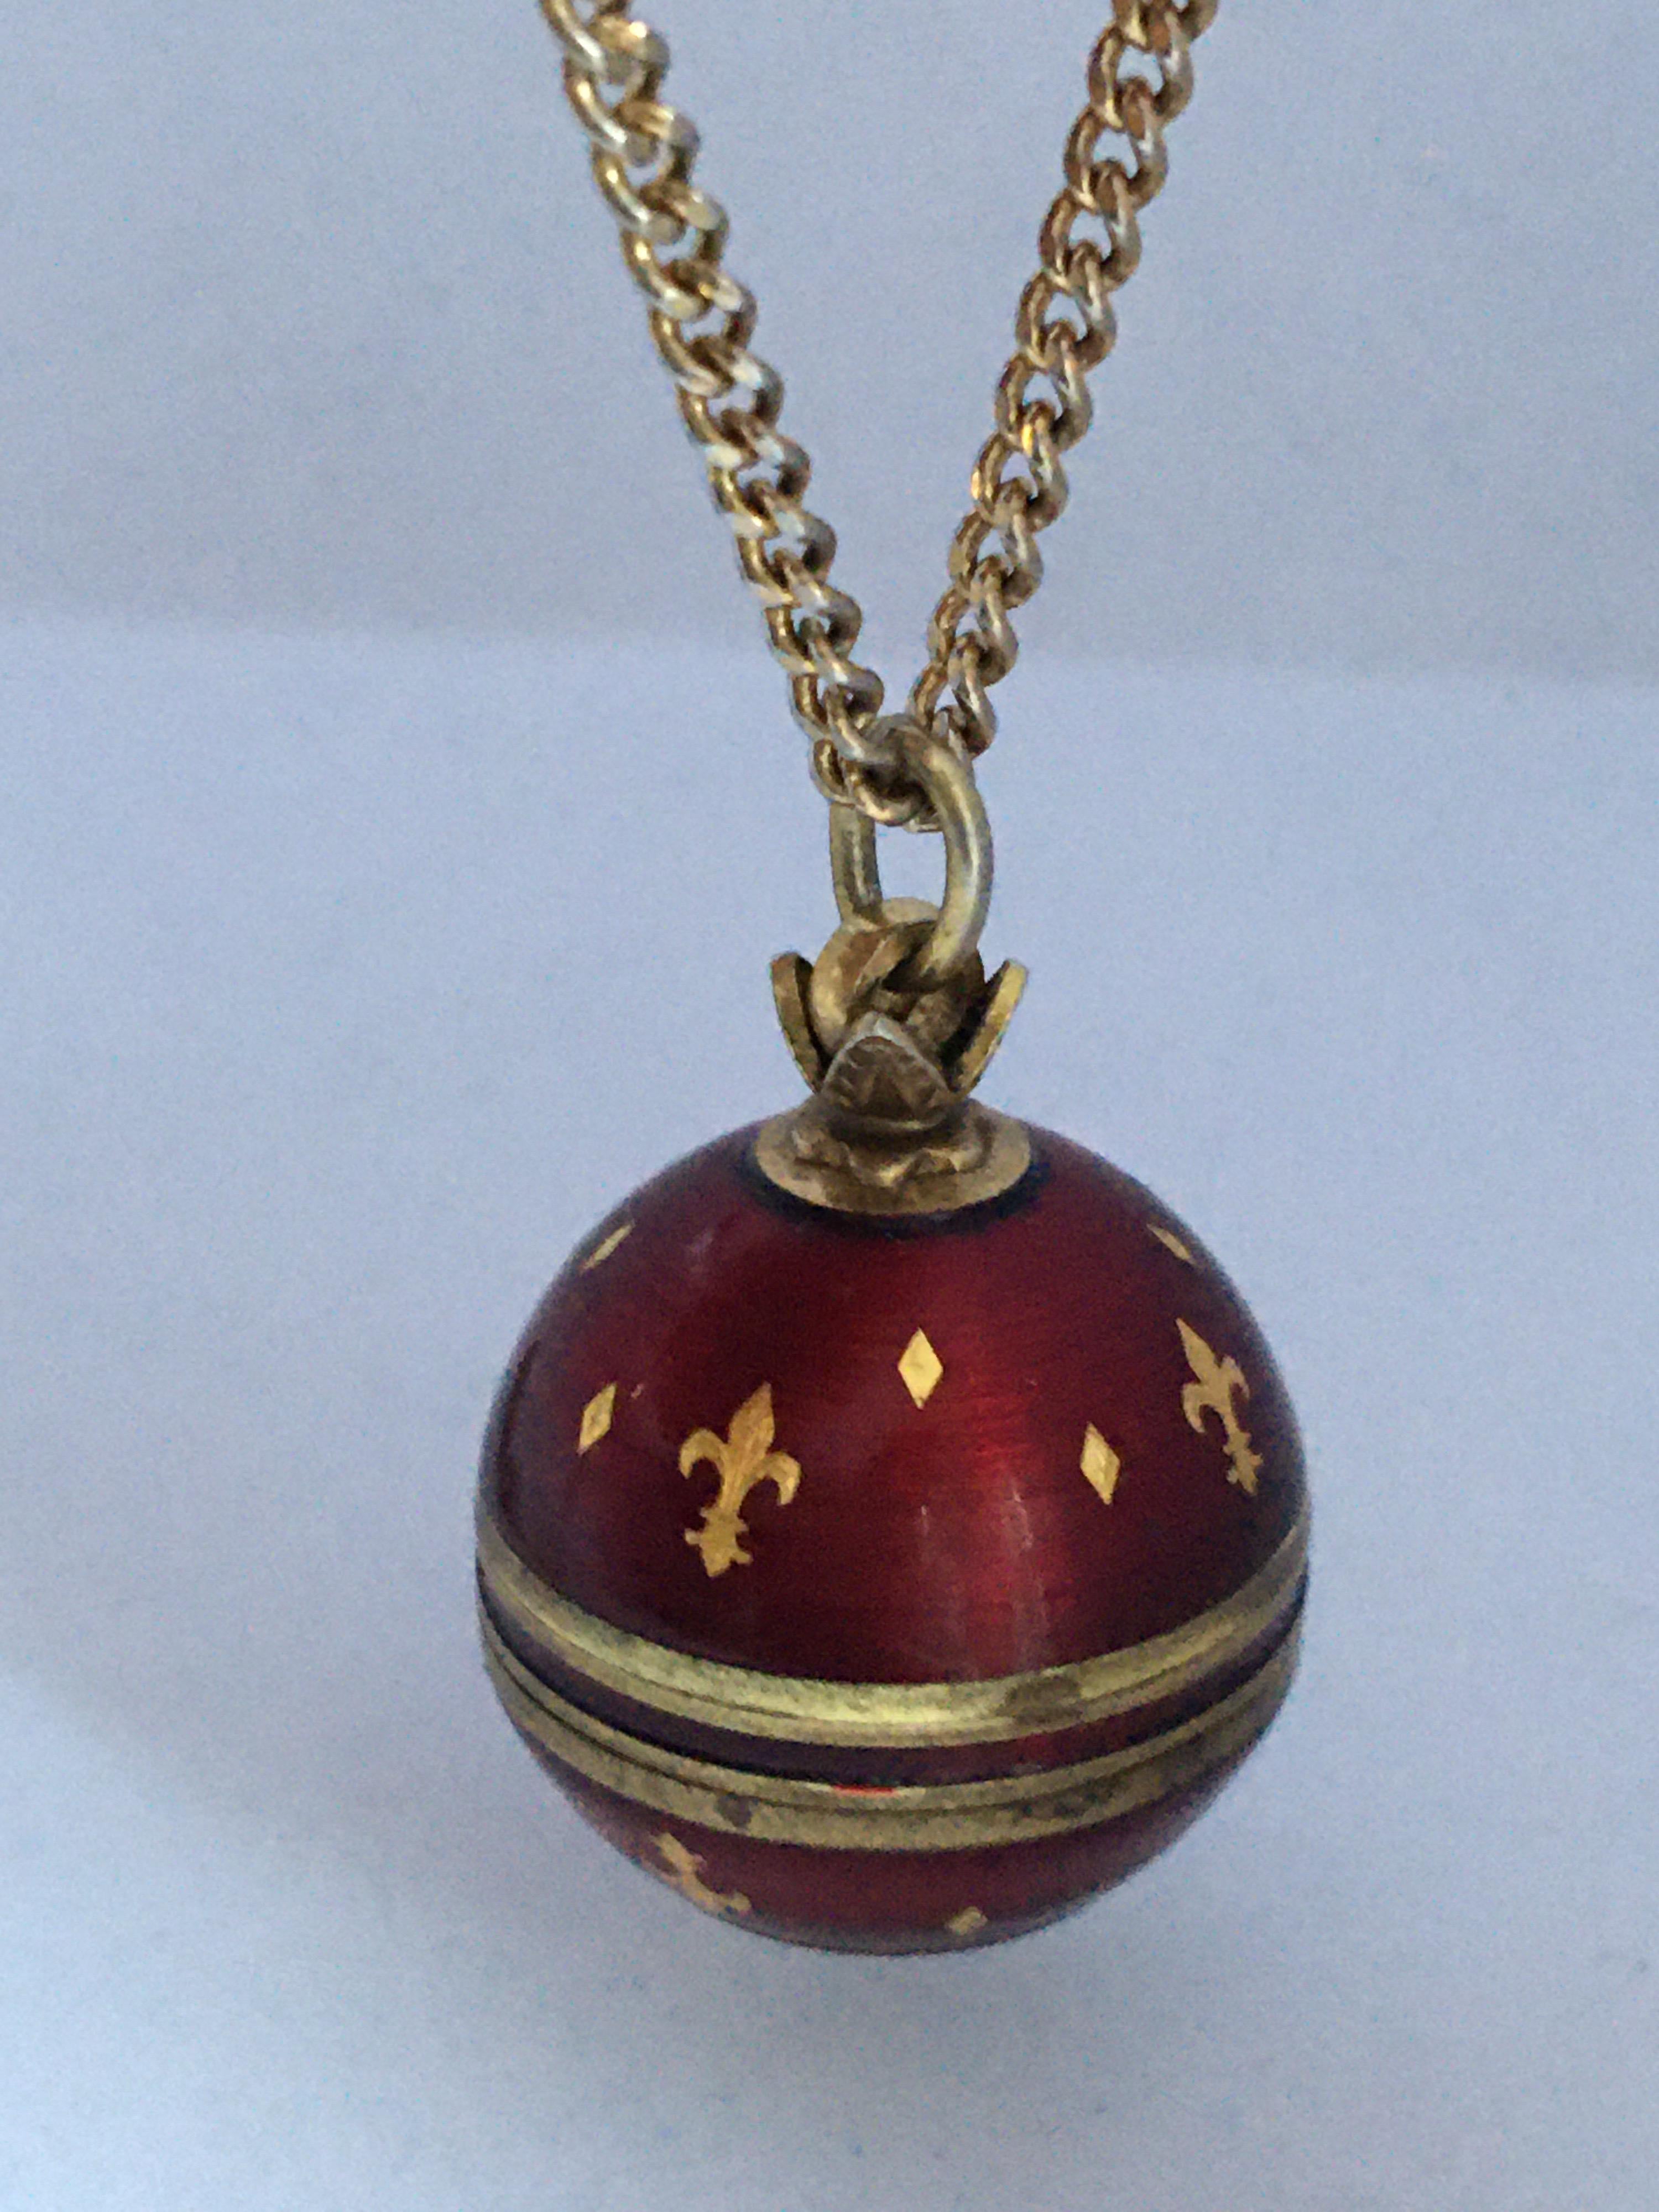 Vintage Gold-Plated Red Enamel Guilloche Hand-Winding Ball Pendant Swiss Watch For Sale 6